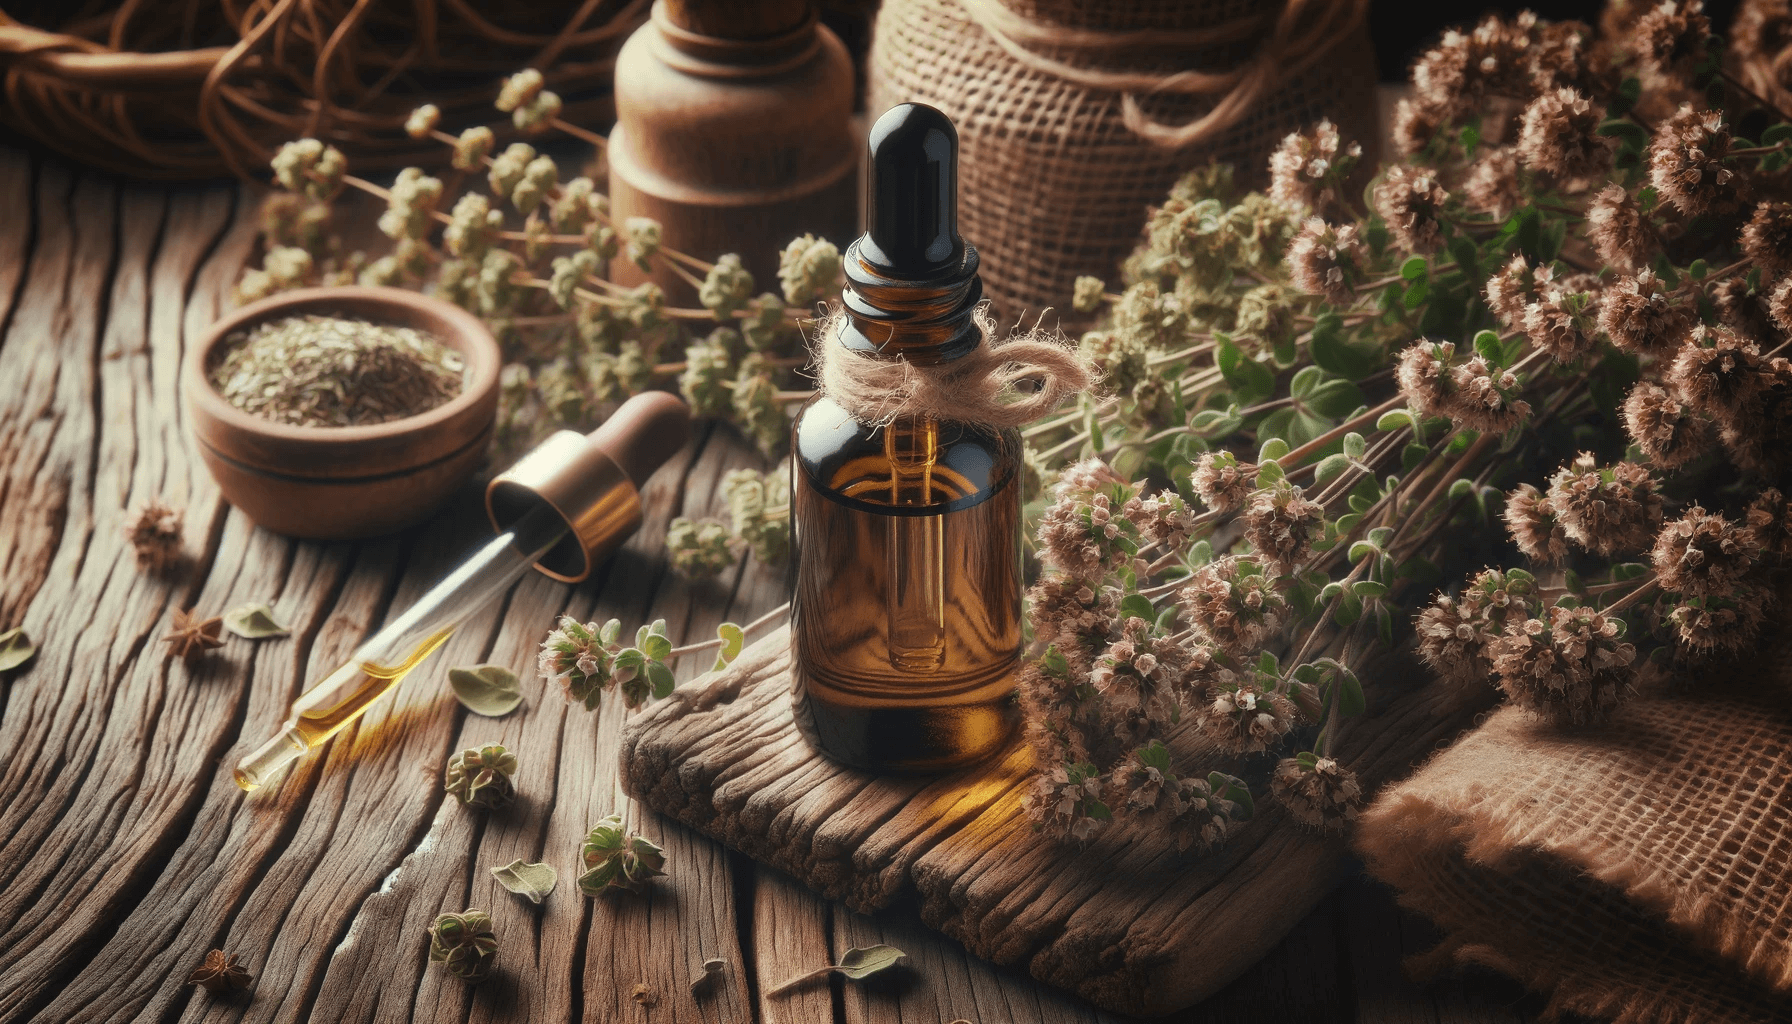 Oregano oil bottle surrounded by dried oregano bunches, invoking a sense of traditional herbal remedies and natural healing.